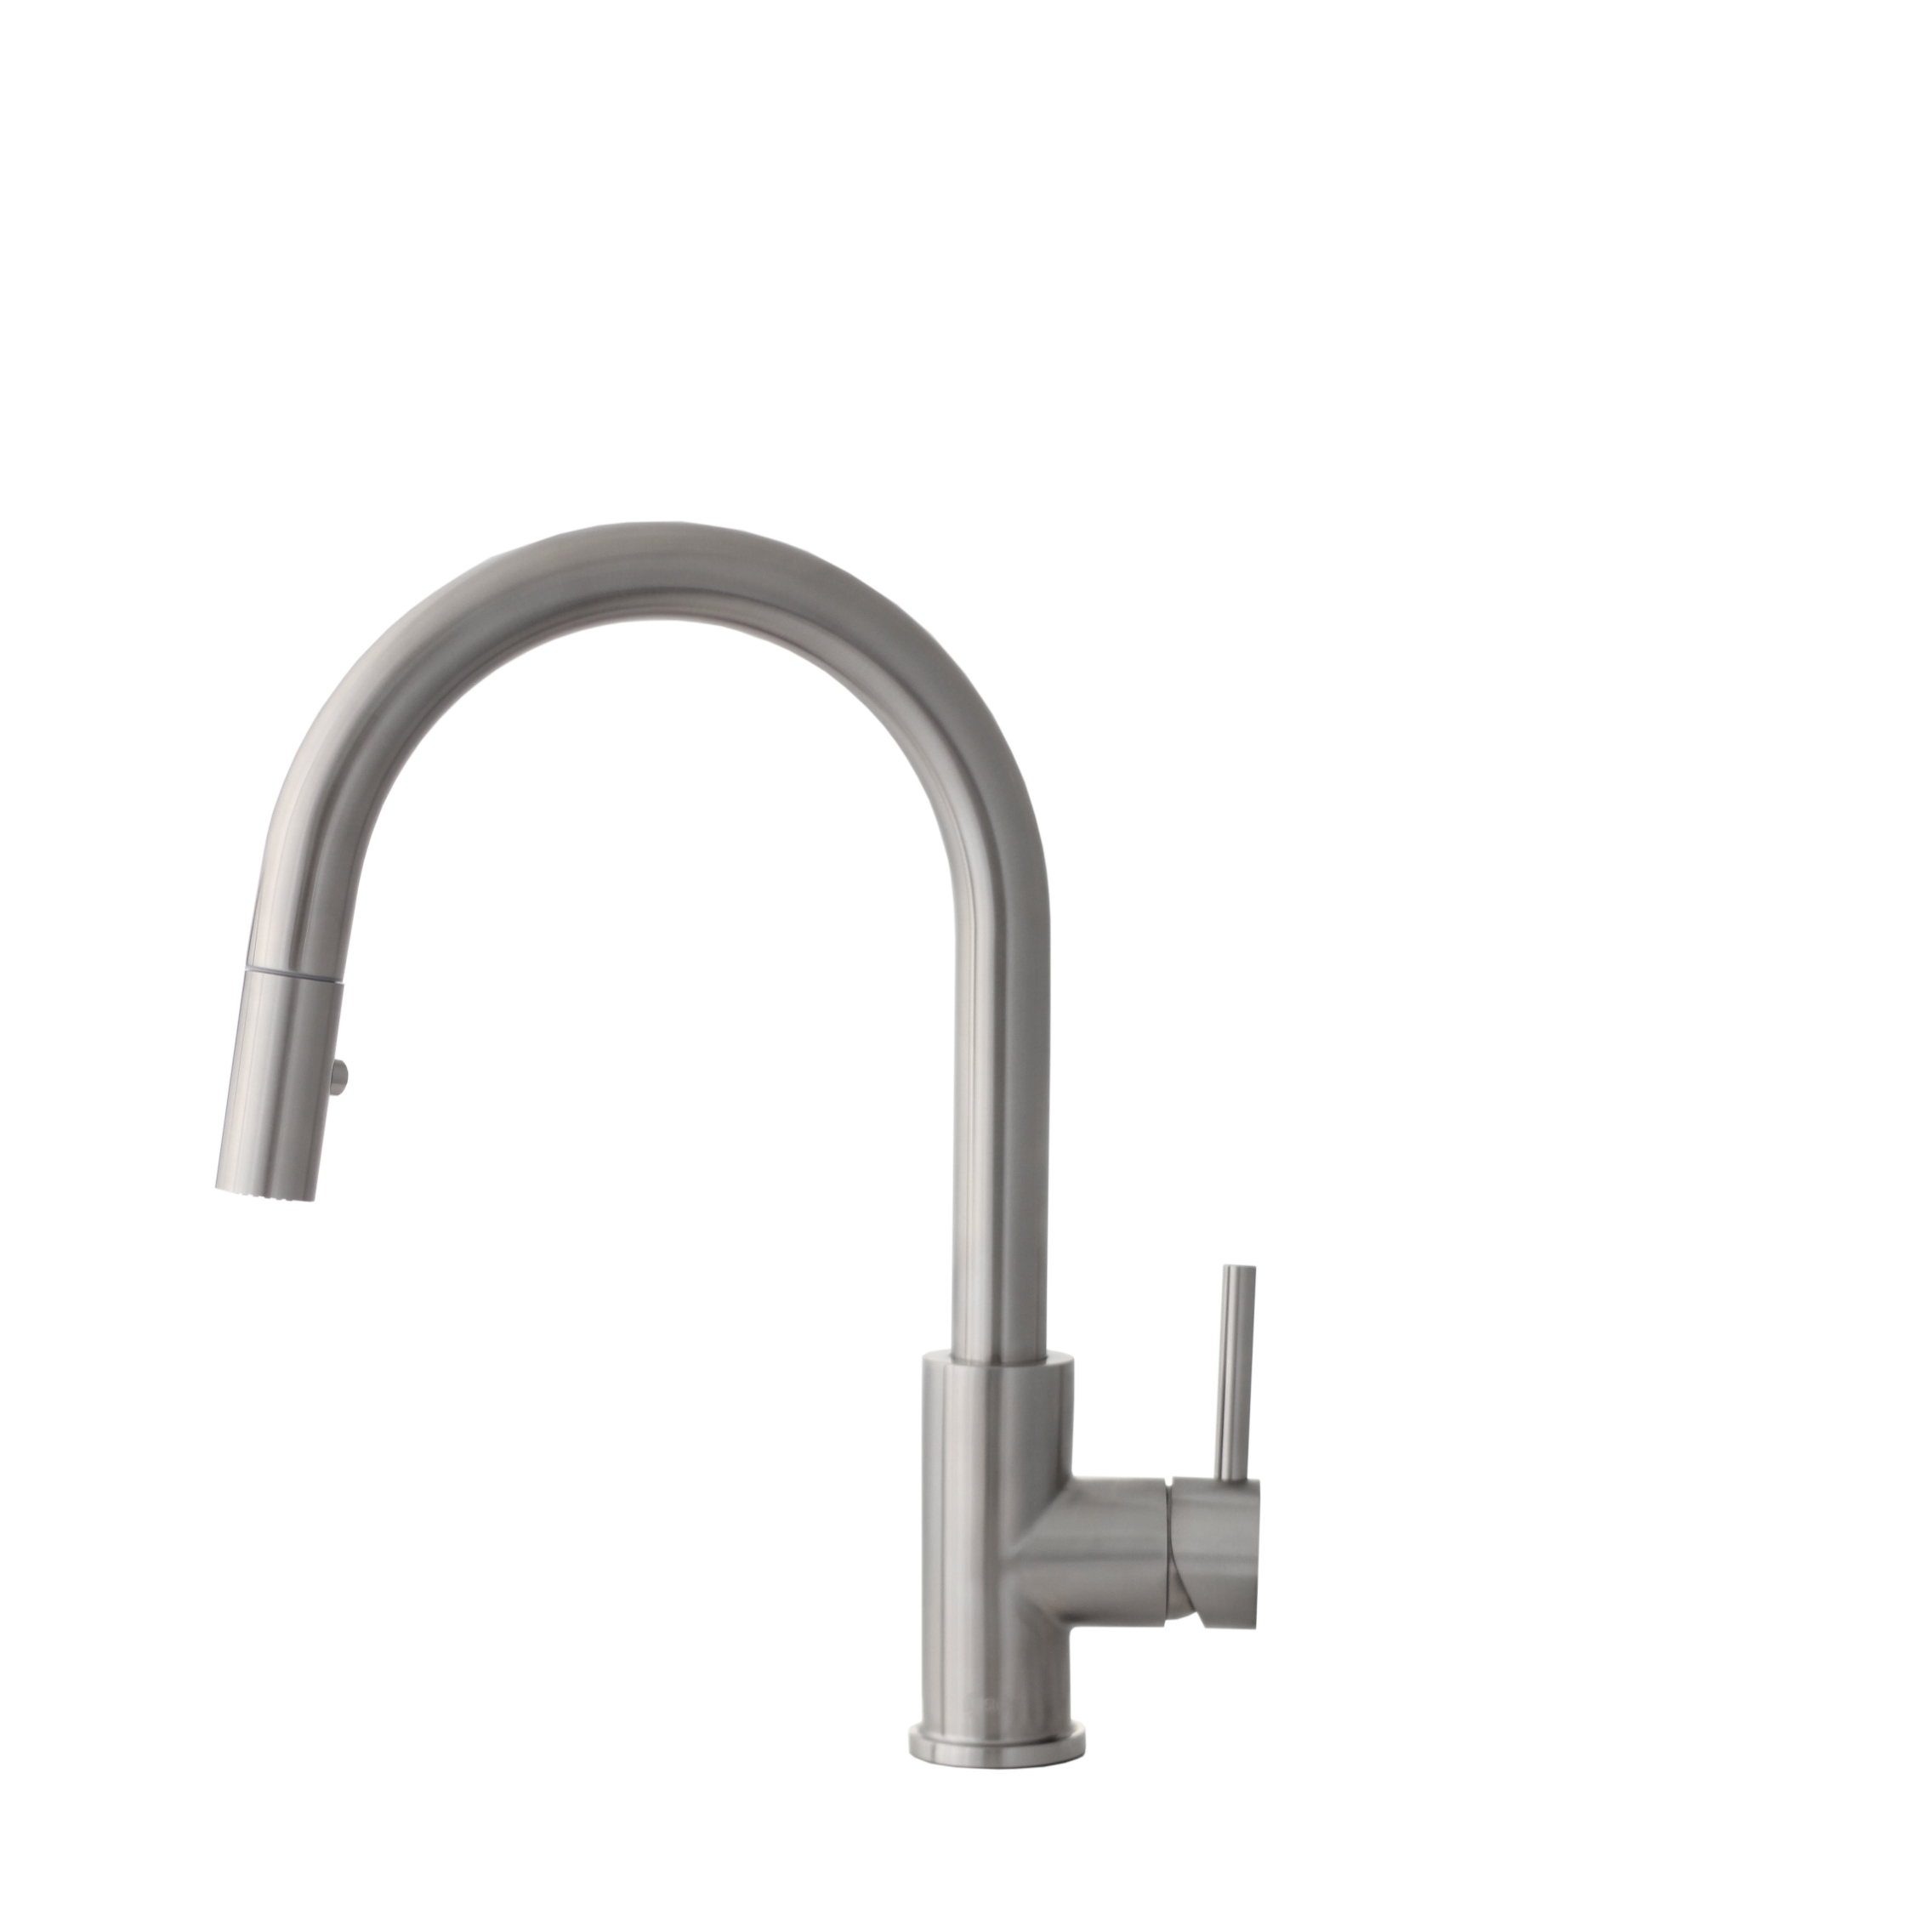 STYLISH Kitchen Sink Faucet Dual Mode Stainless Steel Brushed Finish